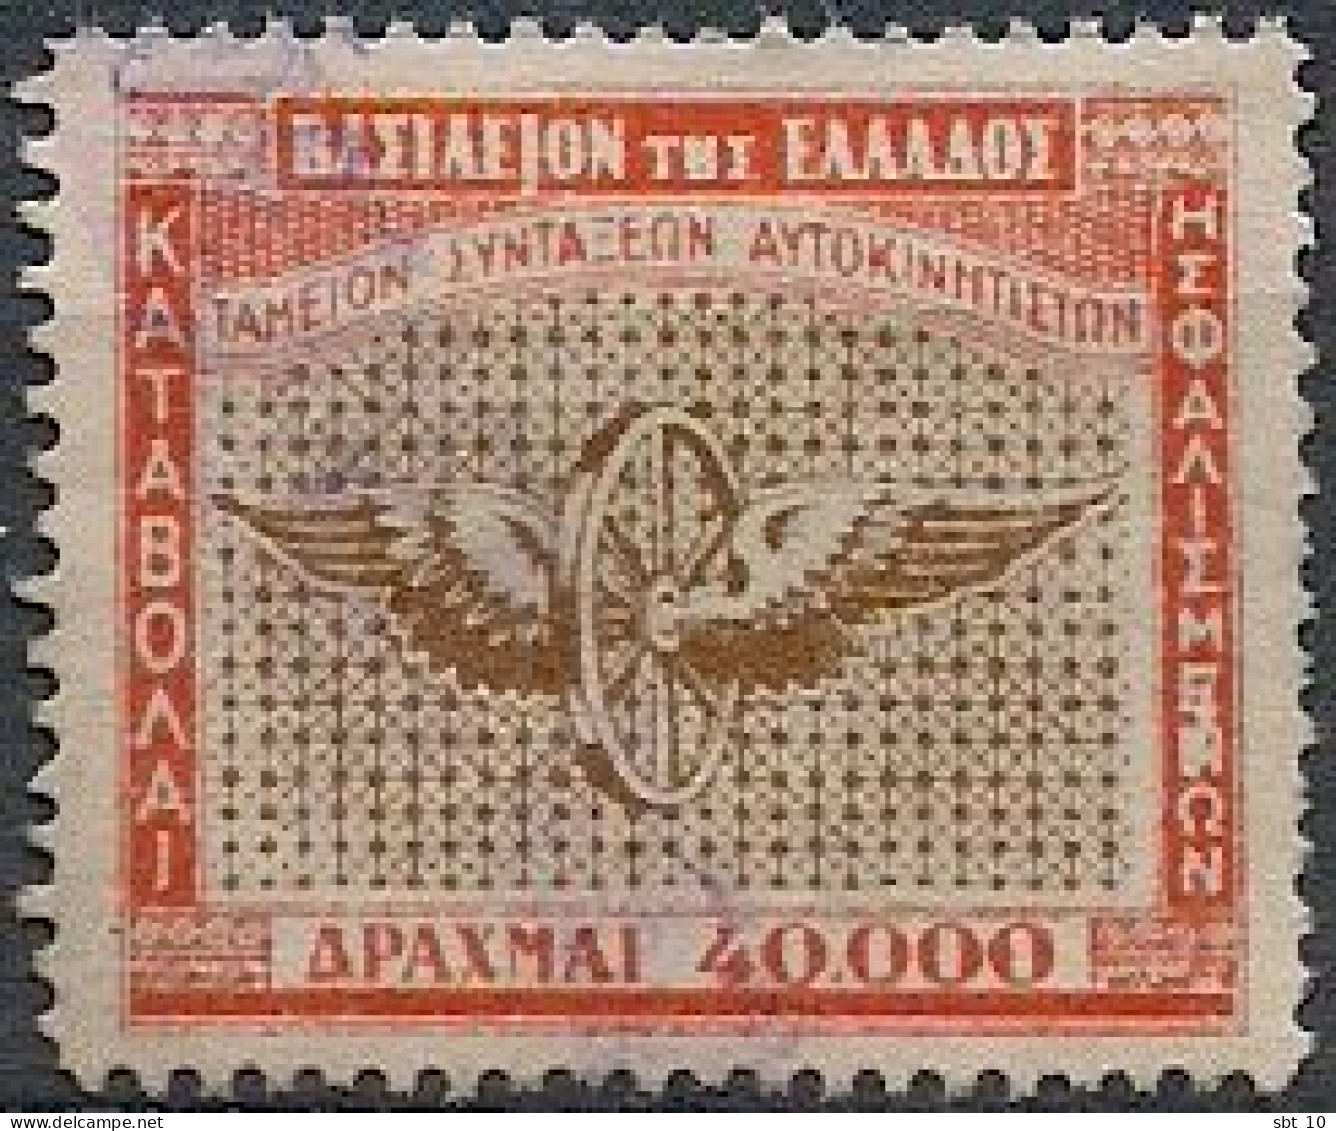 Greece - Pension Fund For Motorists 40000dr. Revenue Stamps - Used - Fiscales